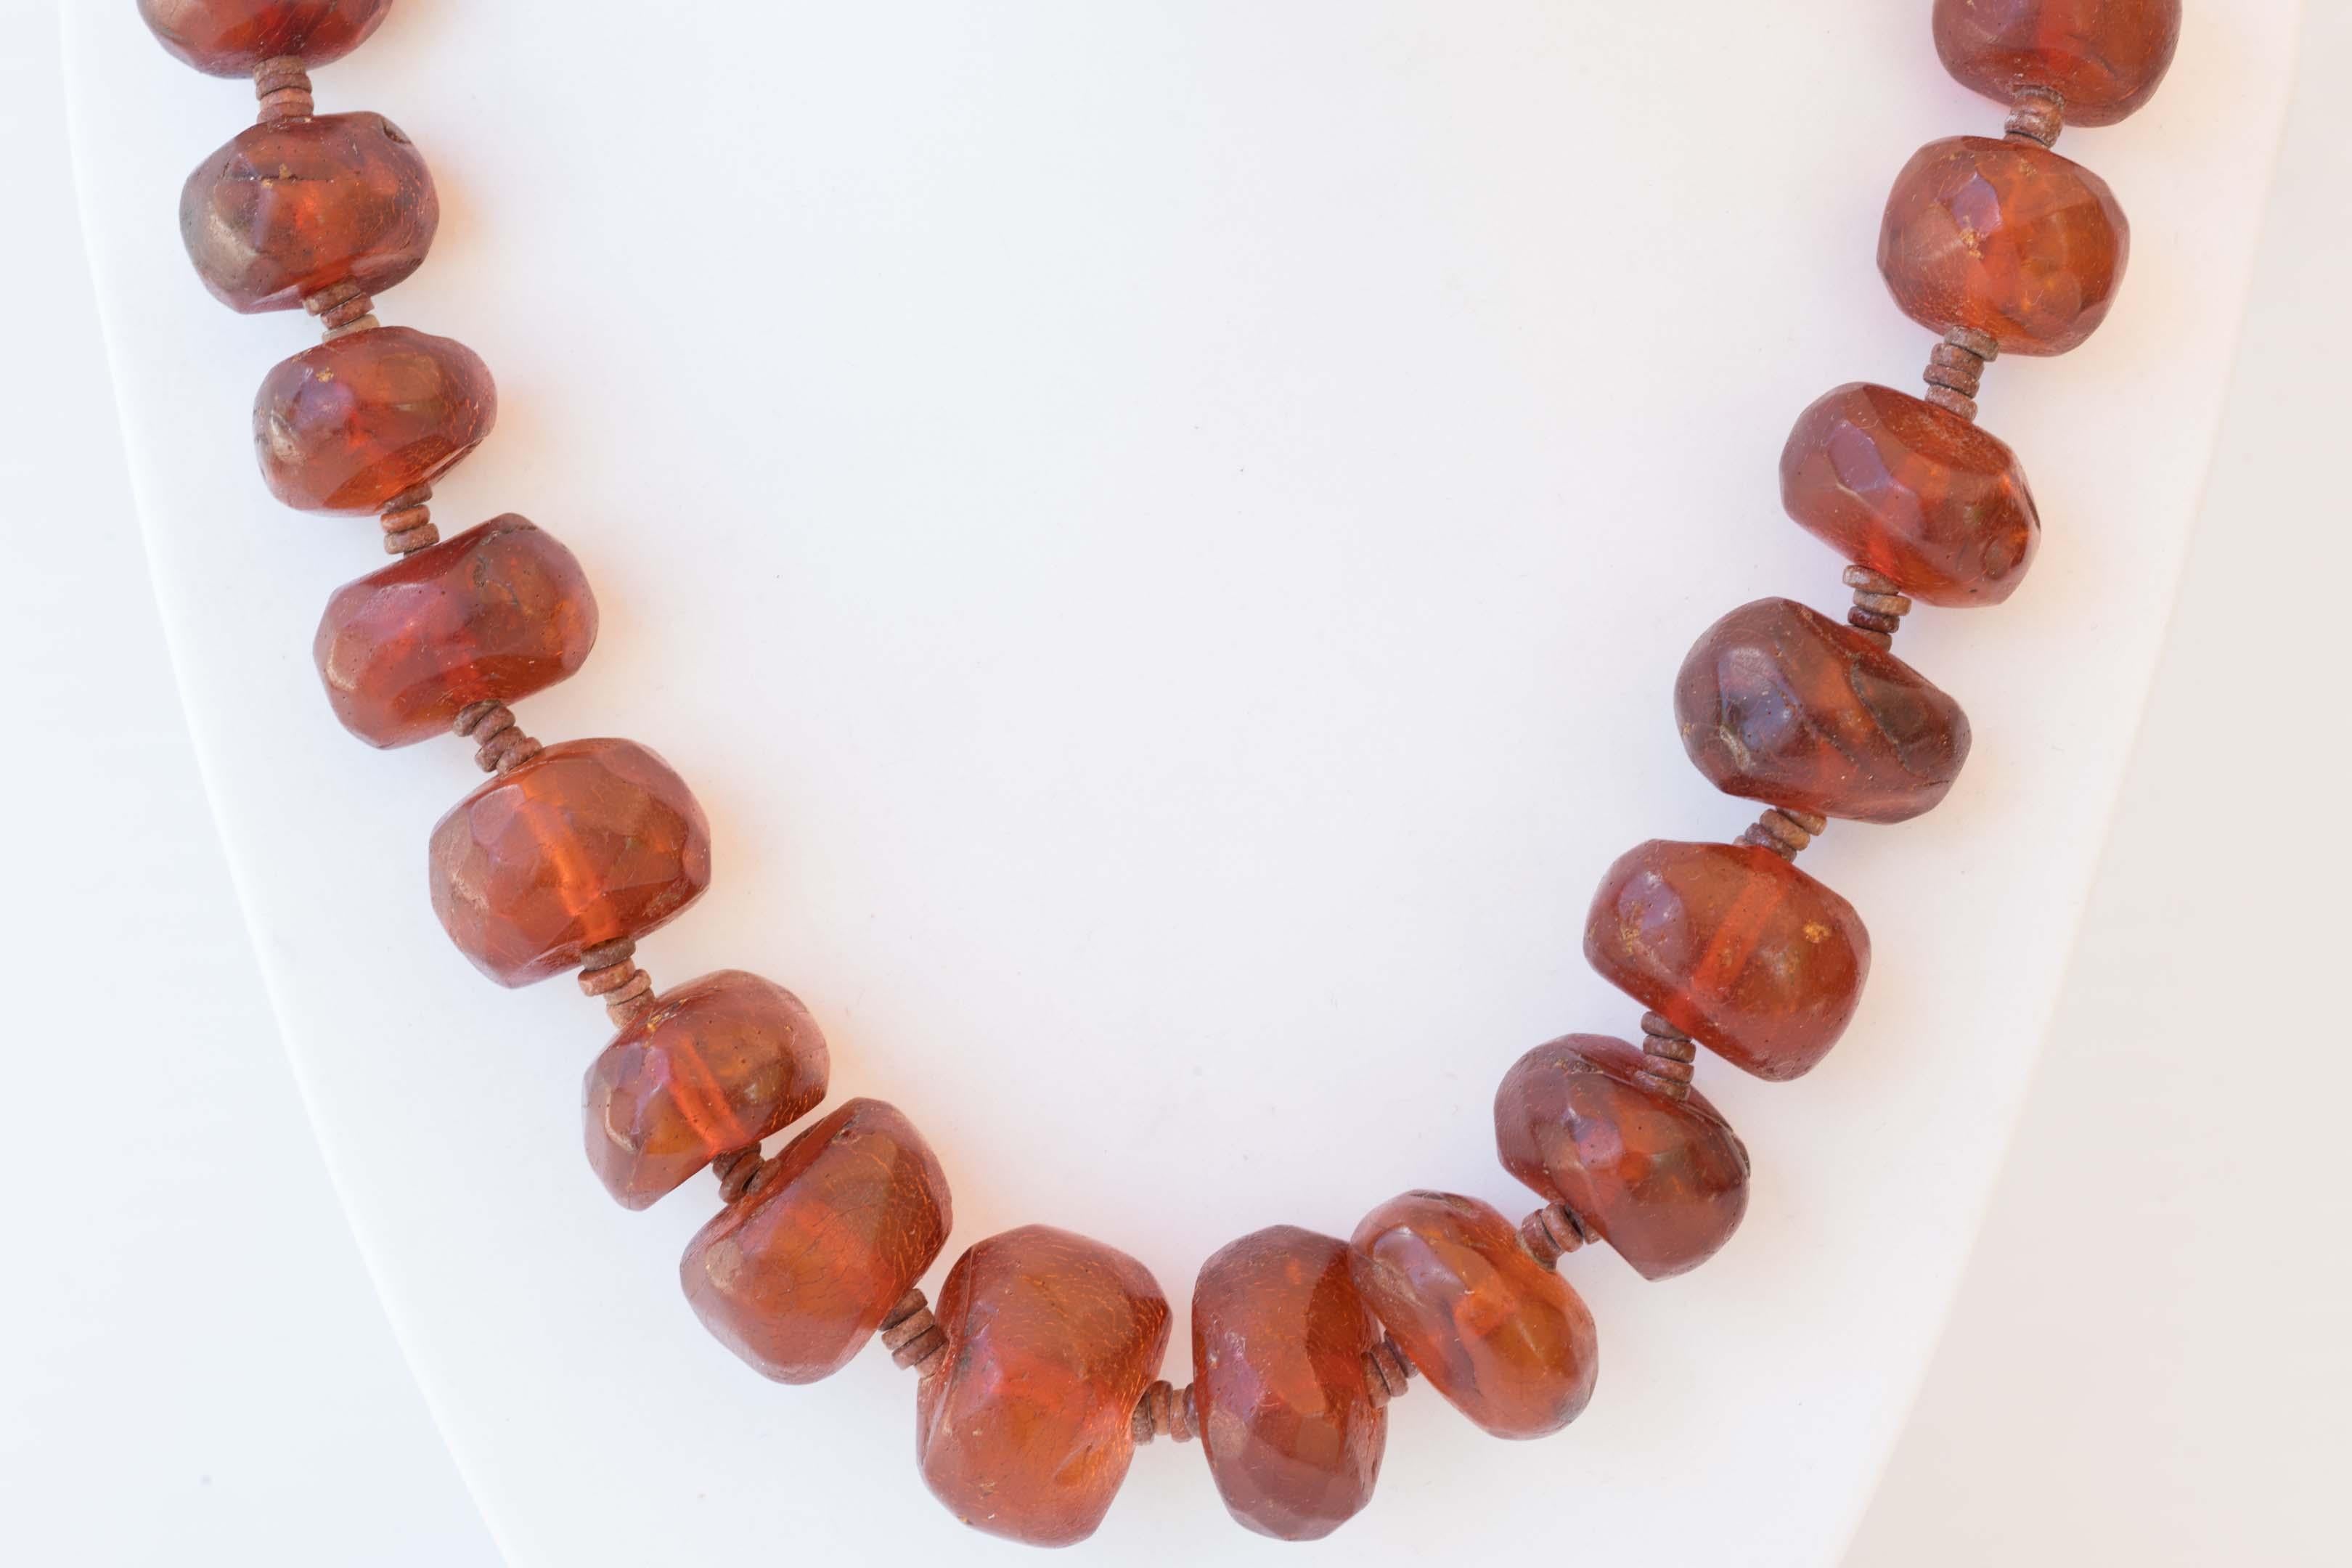 Rare reddish brown Burmite amber fossil tribal necklace late 19th century. Made of 34 irregular facetted beads from 13mm to 24mm and 4 round stone beads in between. The necklace measures 23 1/2 inches long, with signs of wear and minor fading. Made